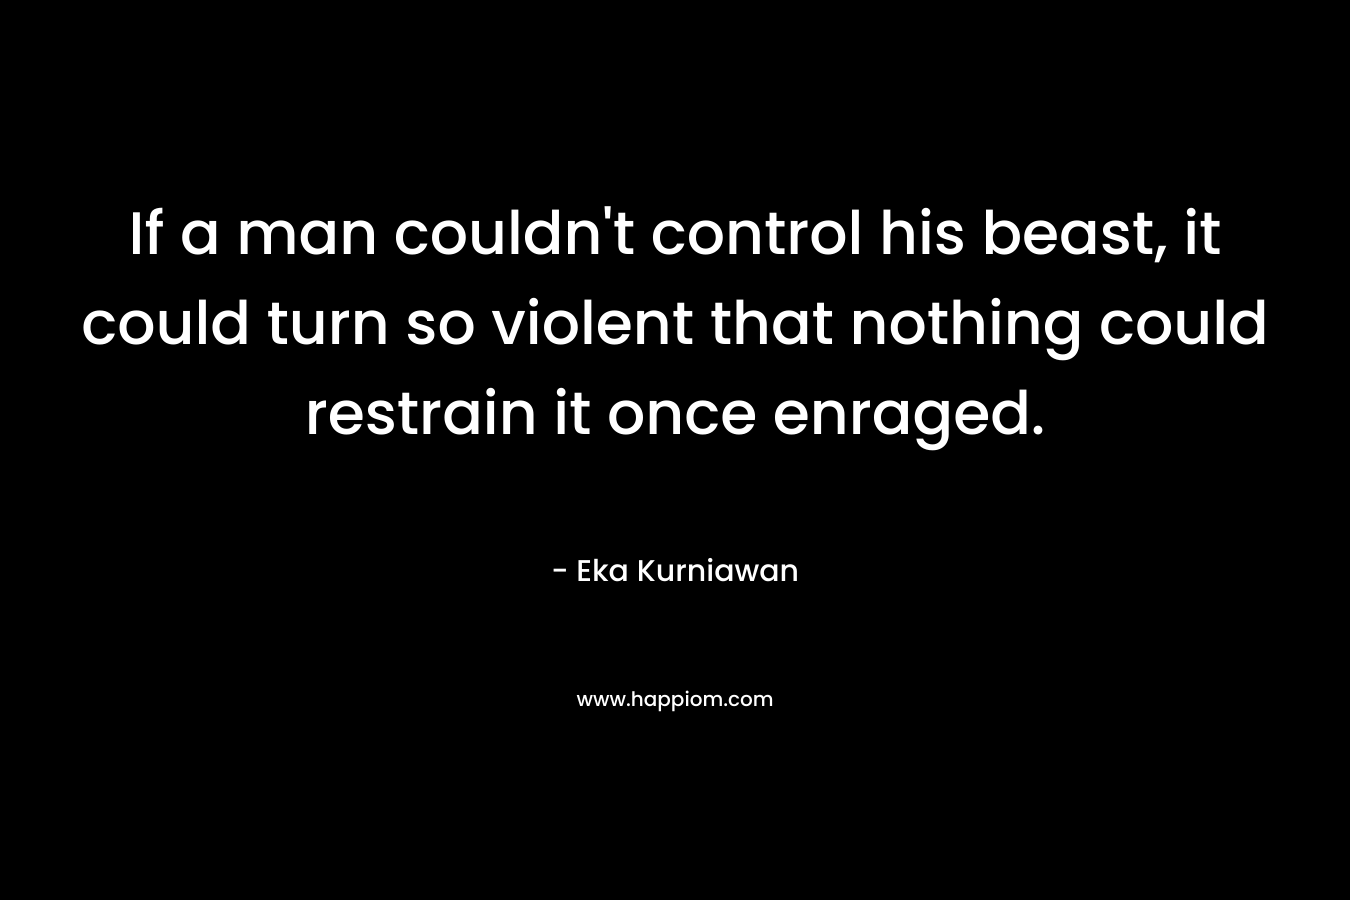 If a man couldn’t control his beast, it could turn so violent that nothing could restrain it once enraged. – Eka Kurniawan